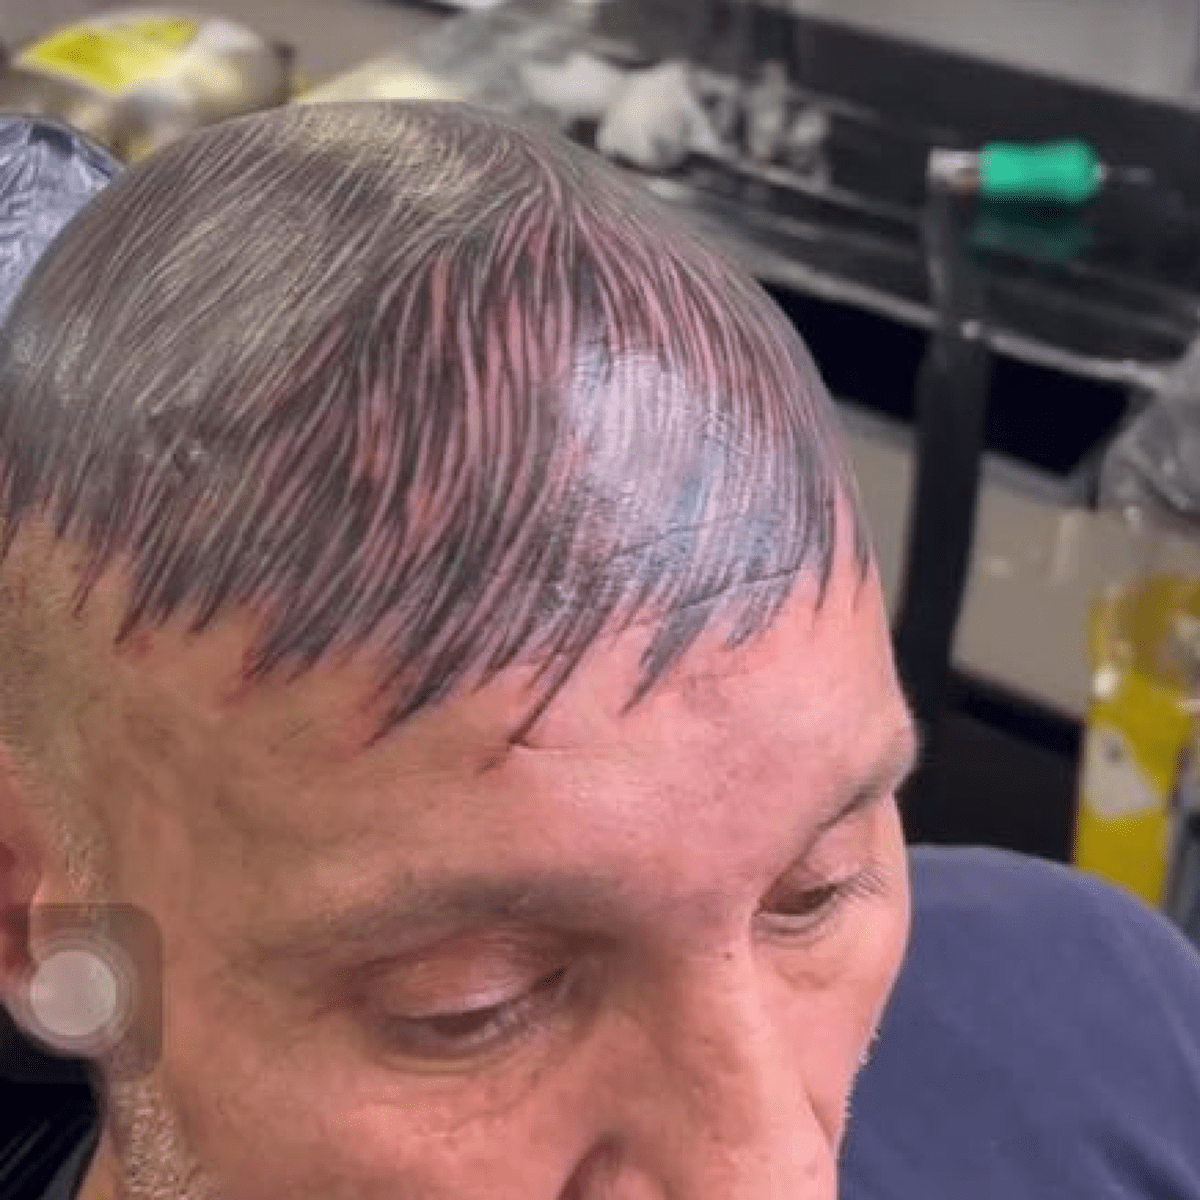 Hair tattoos, might be the best choice for those dealing with uncomfortable hair  loss. — Got Scalp